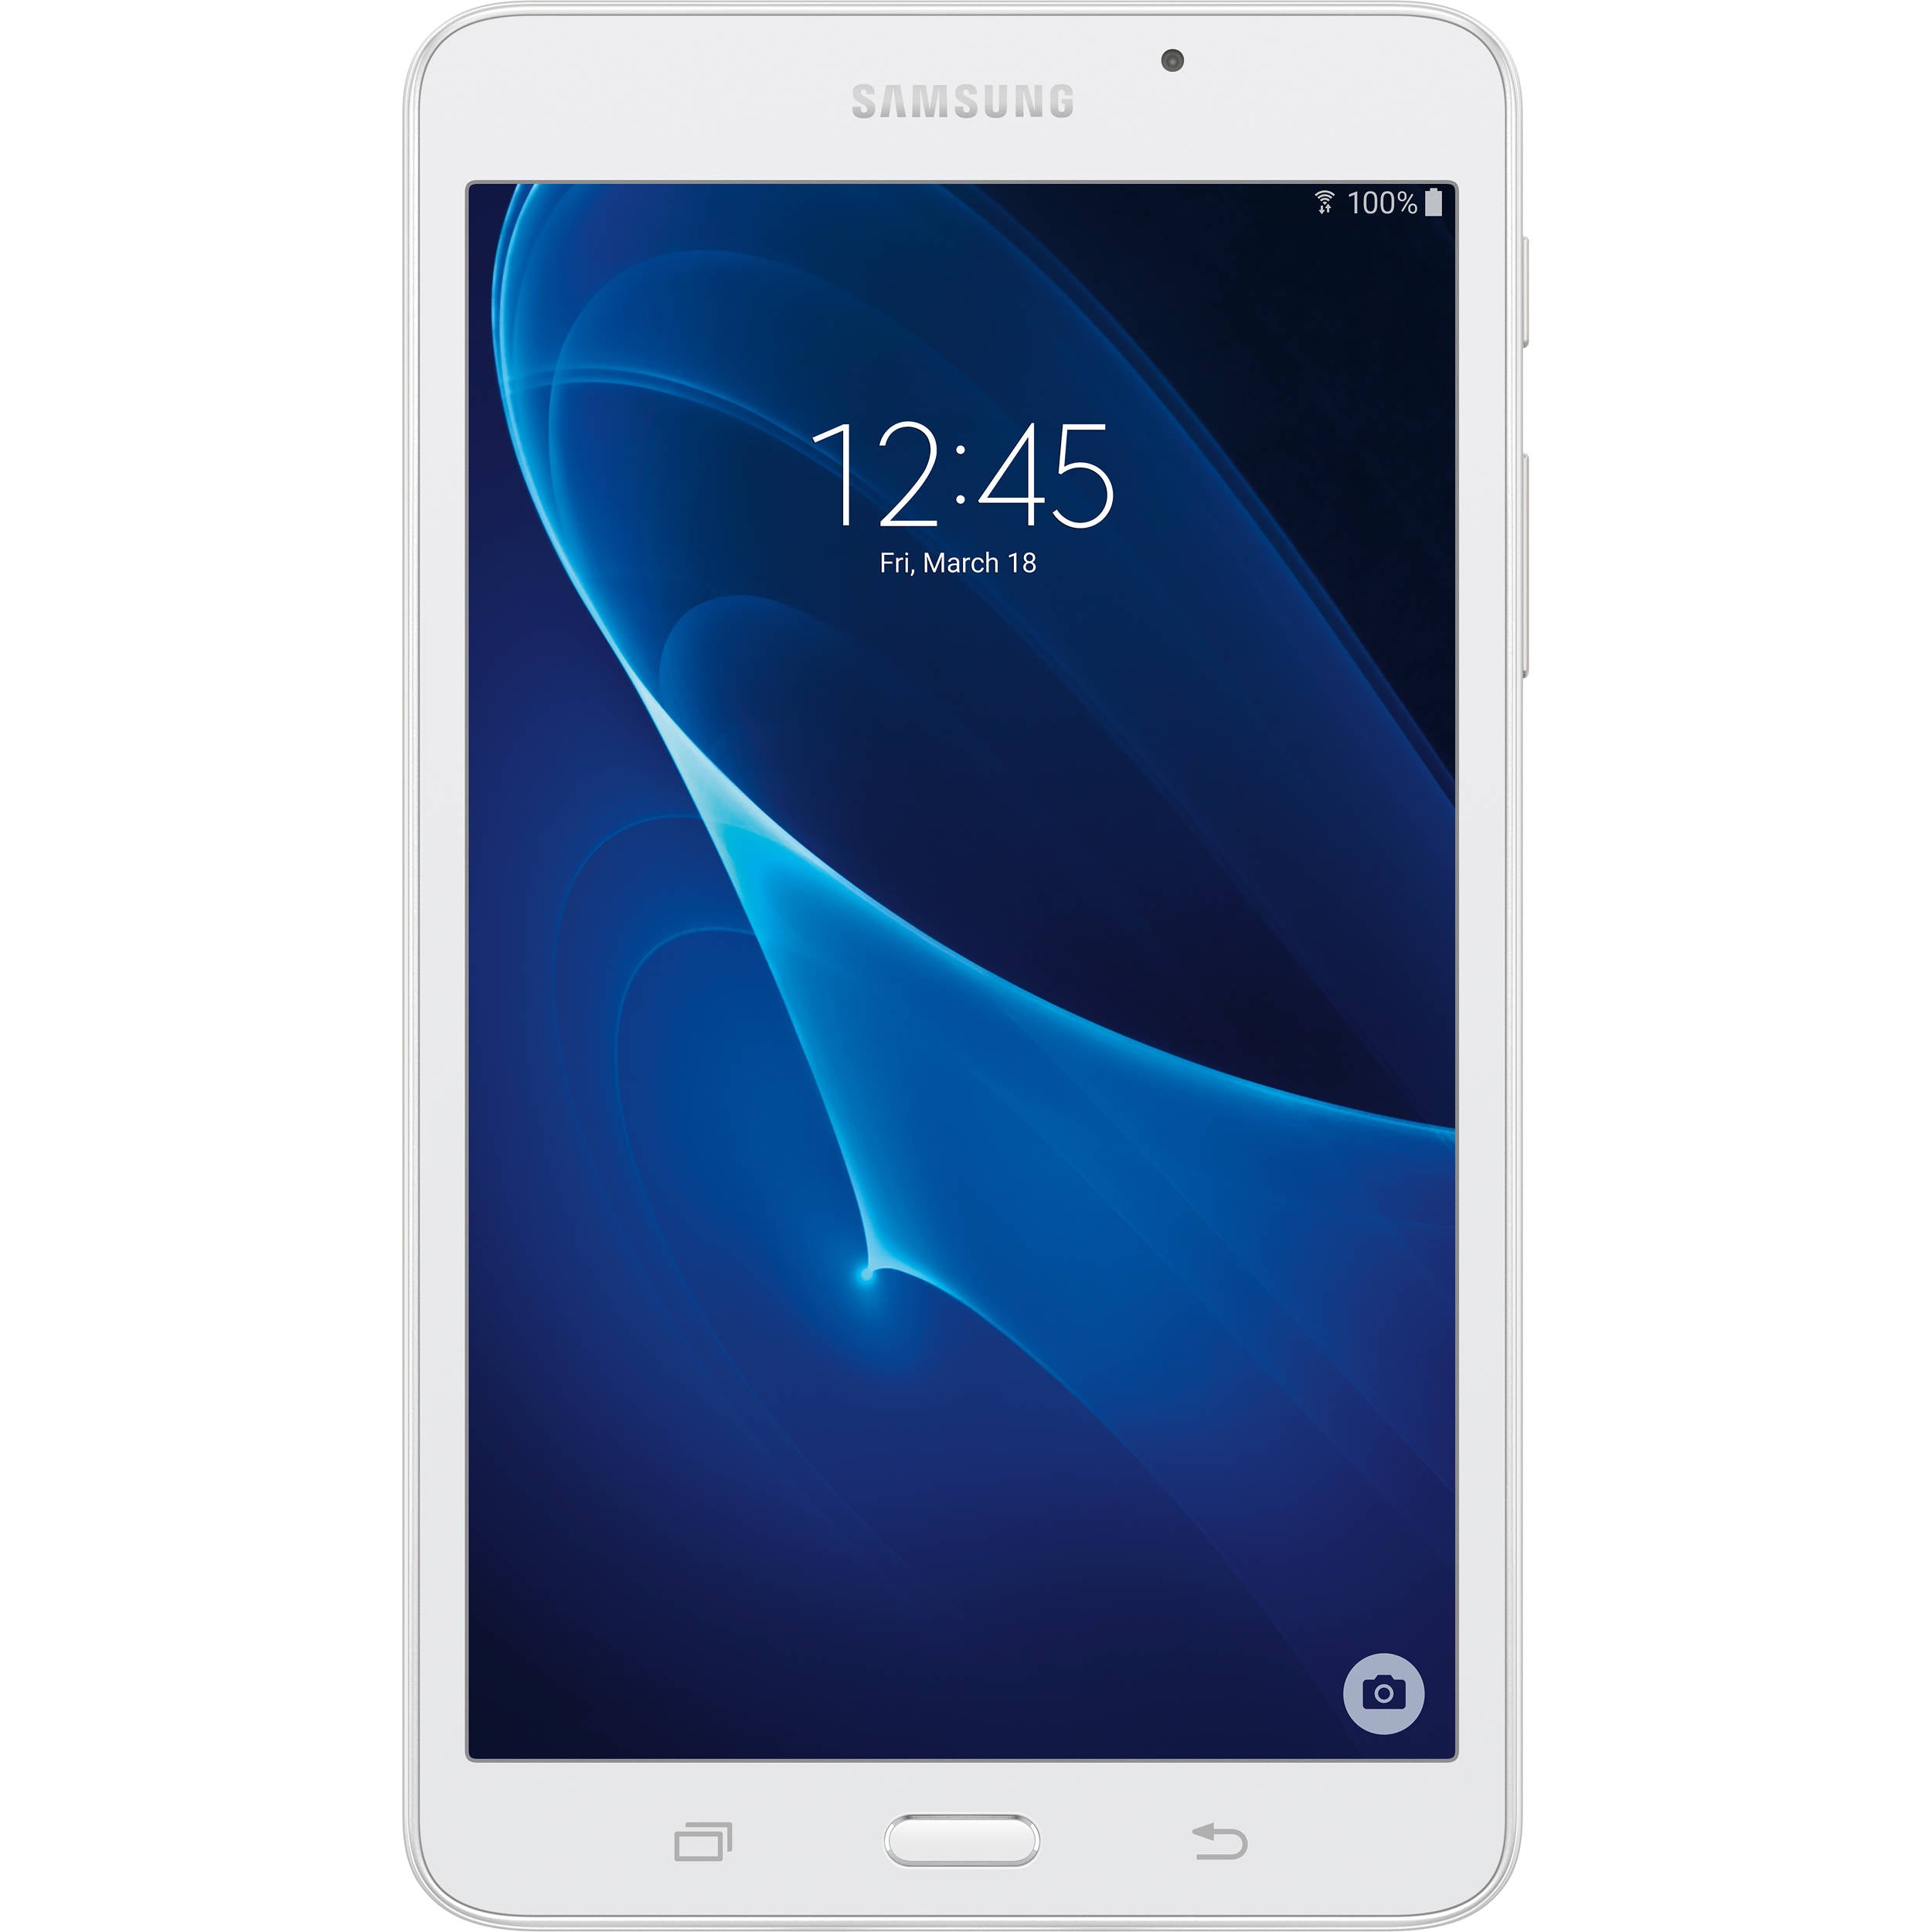 Samsung SM-T280NZWAXAR-RBC 7.0" Galaxy Tab A 8GB Wi-Fi Android Tablet White - Certified Refurbished